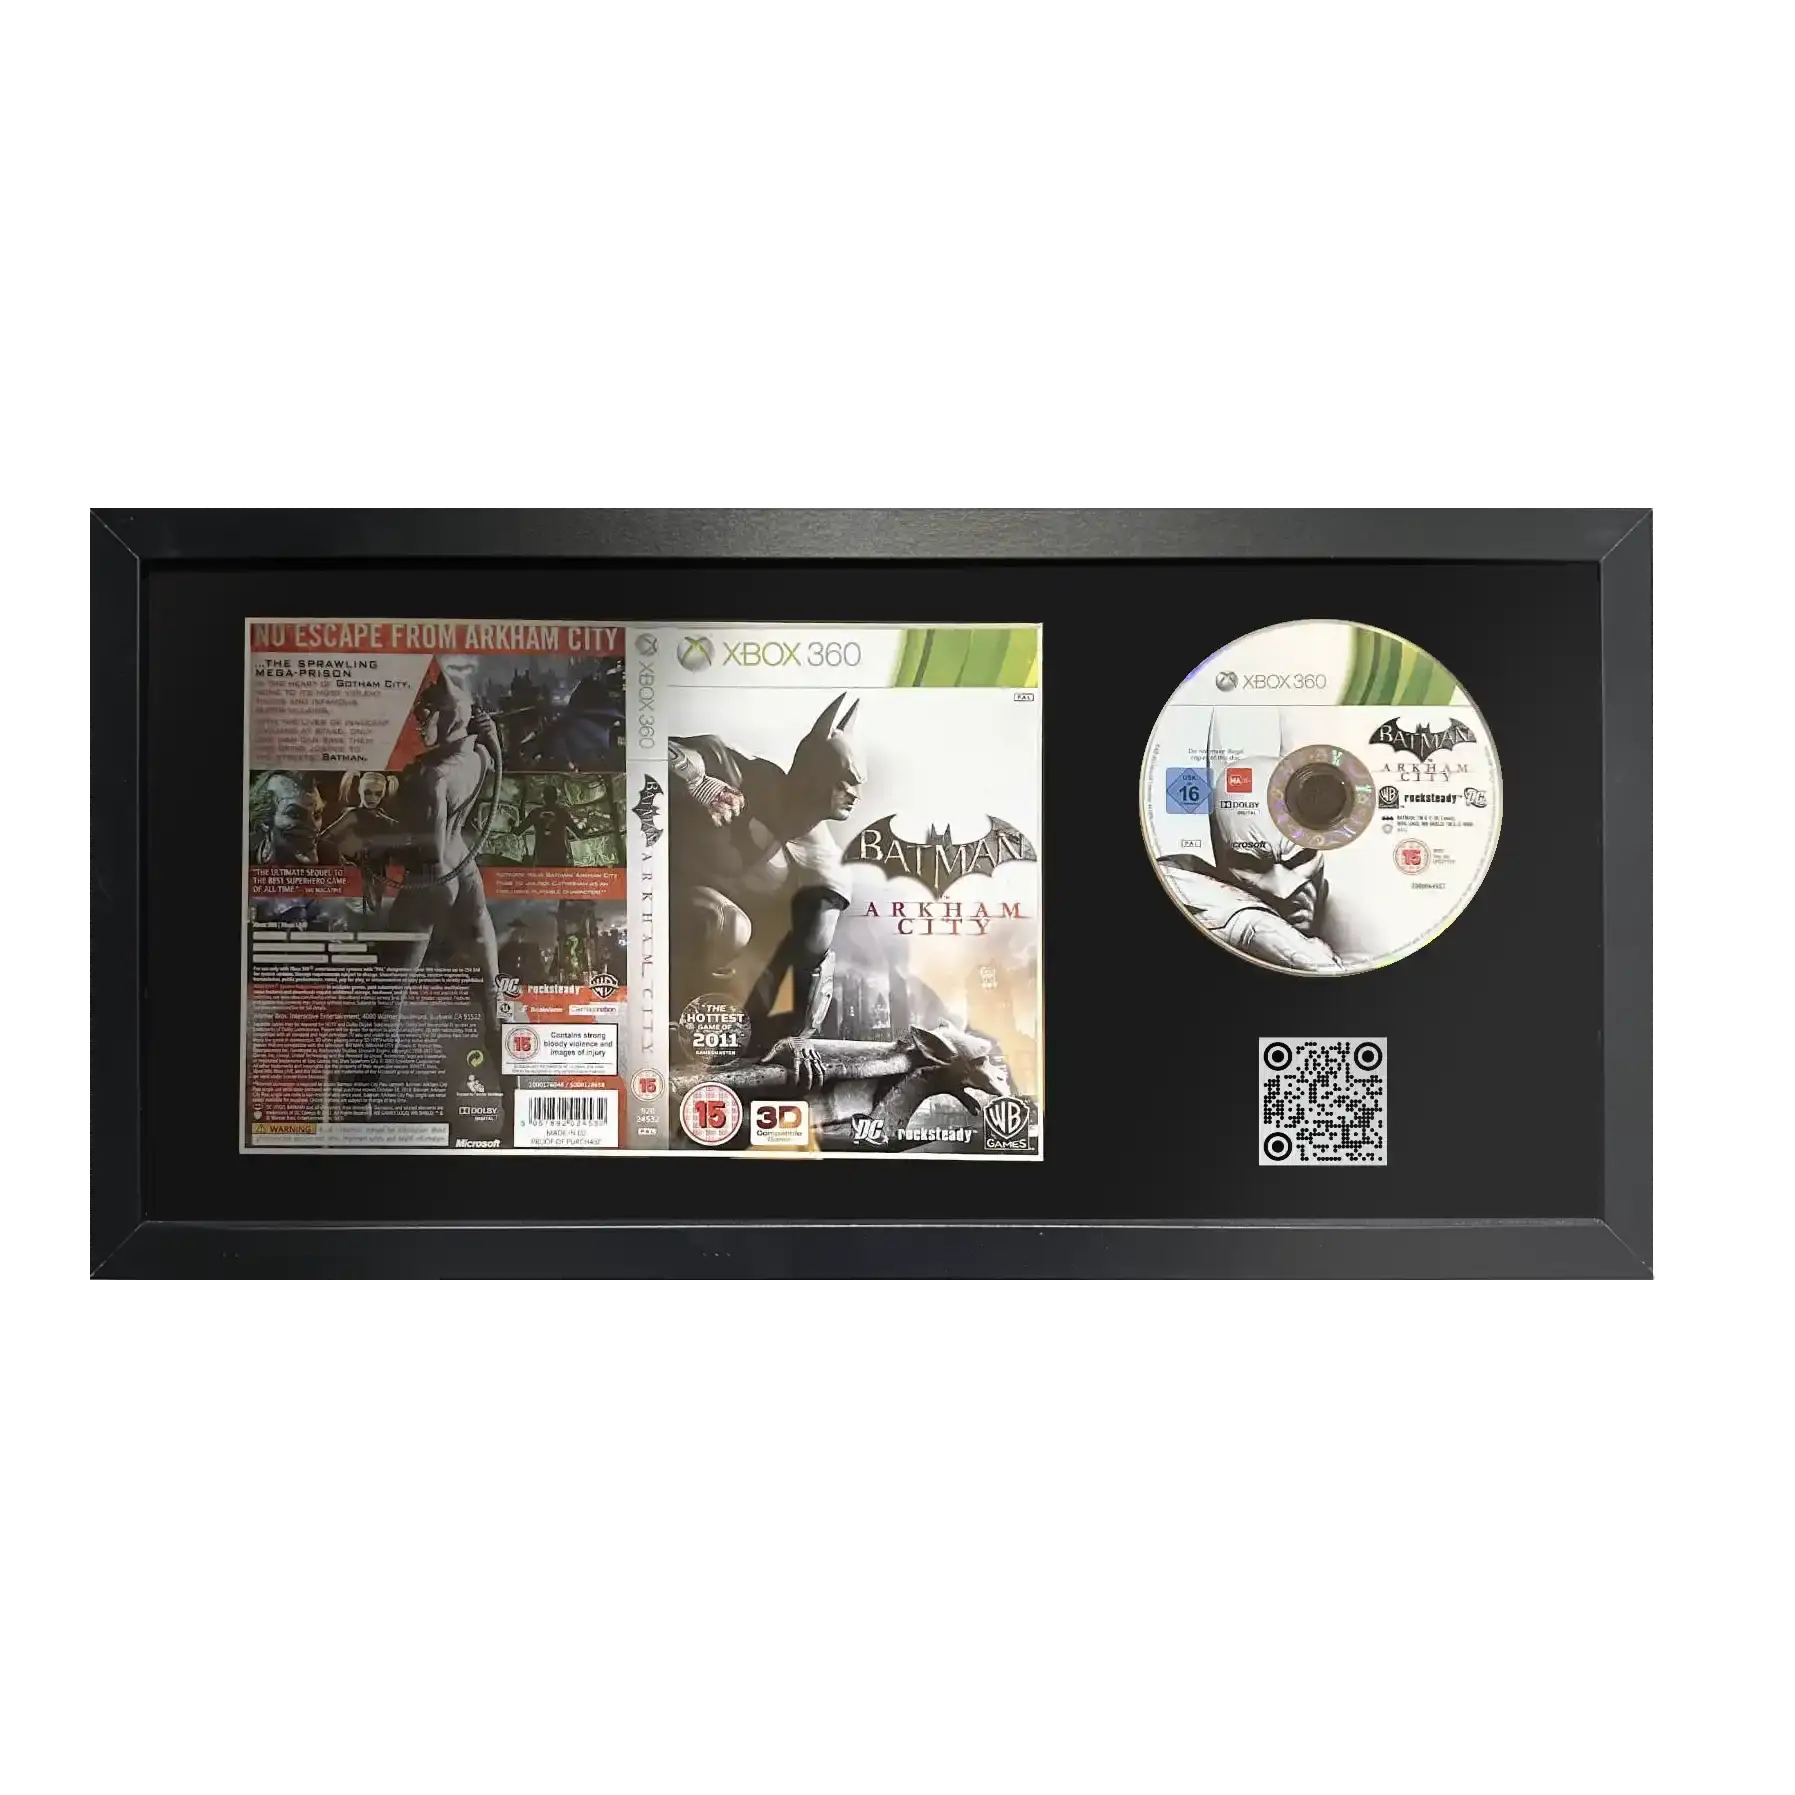 Batman Arkham City for Xbox 360 framed in a picture frame with QR code